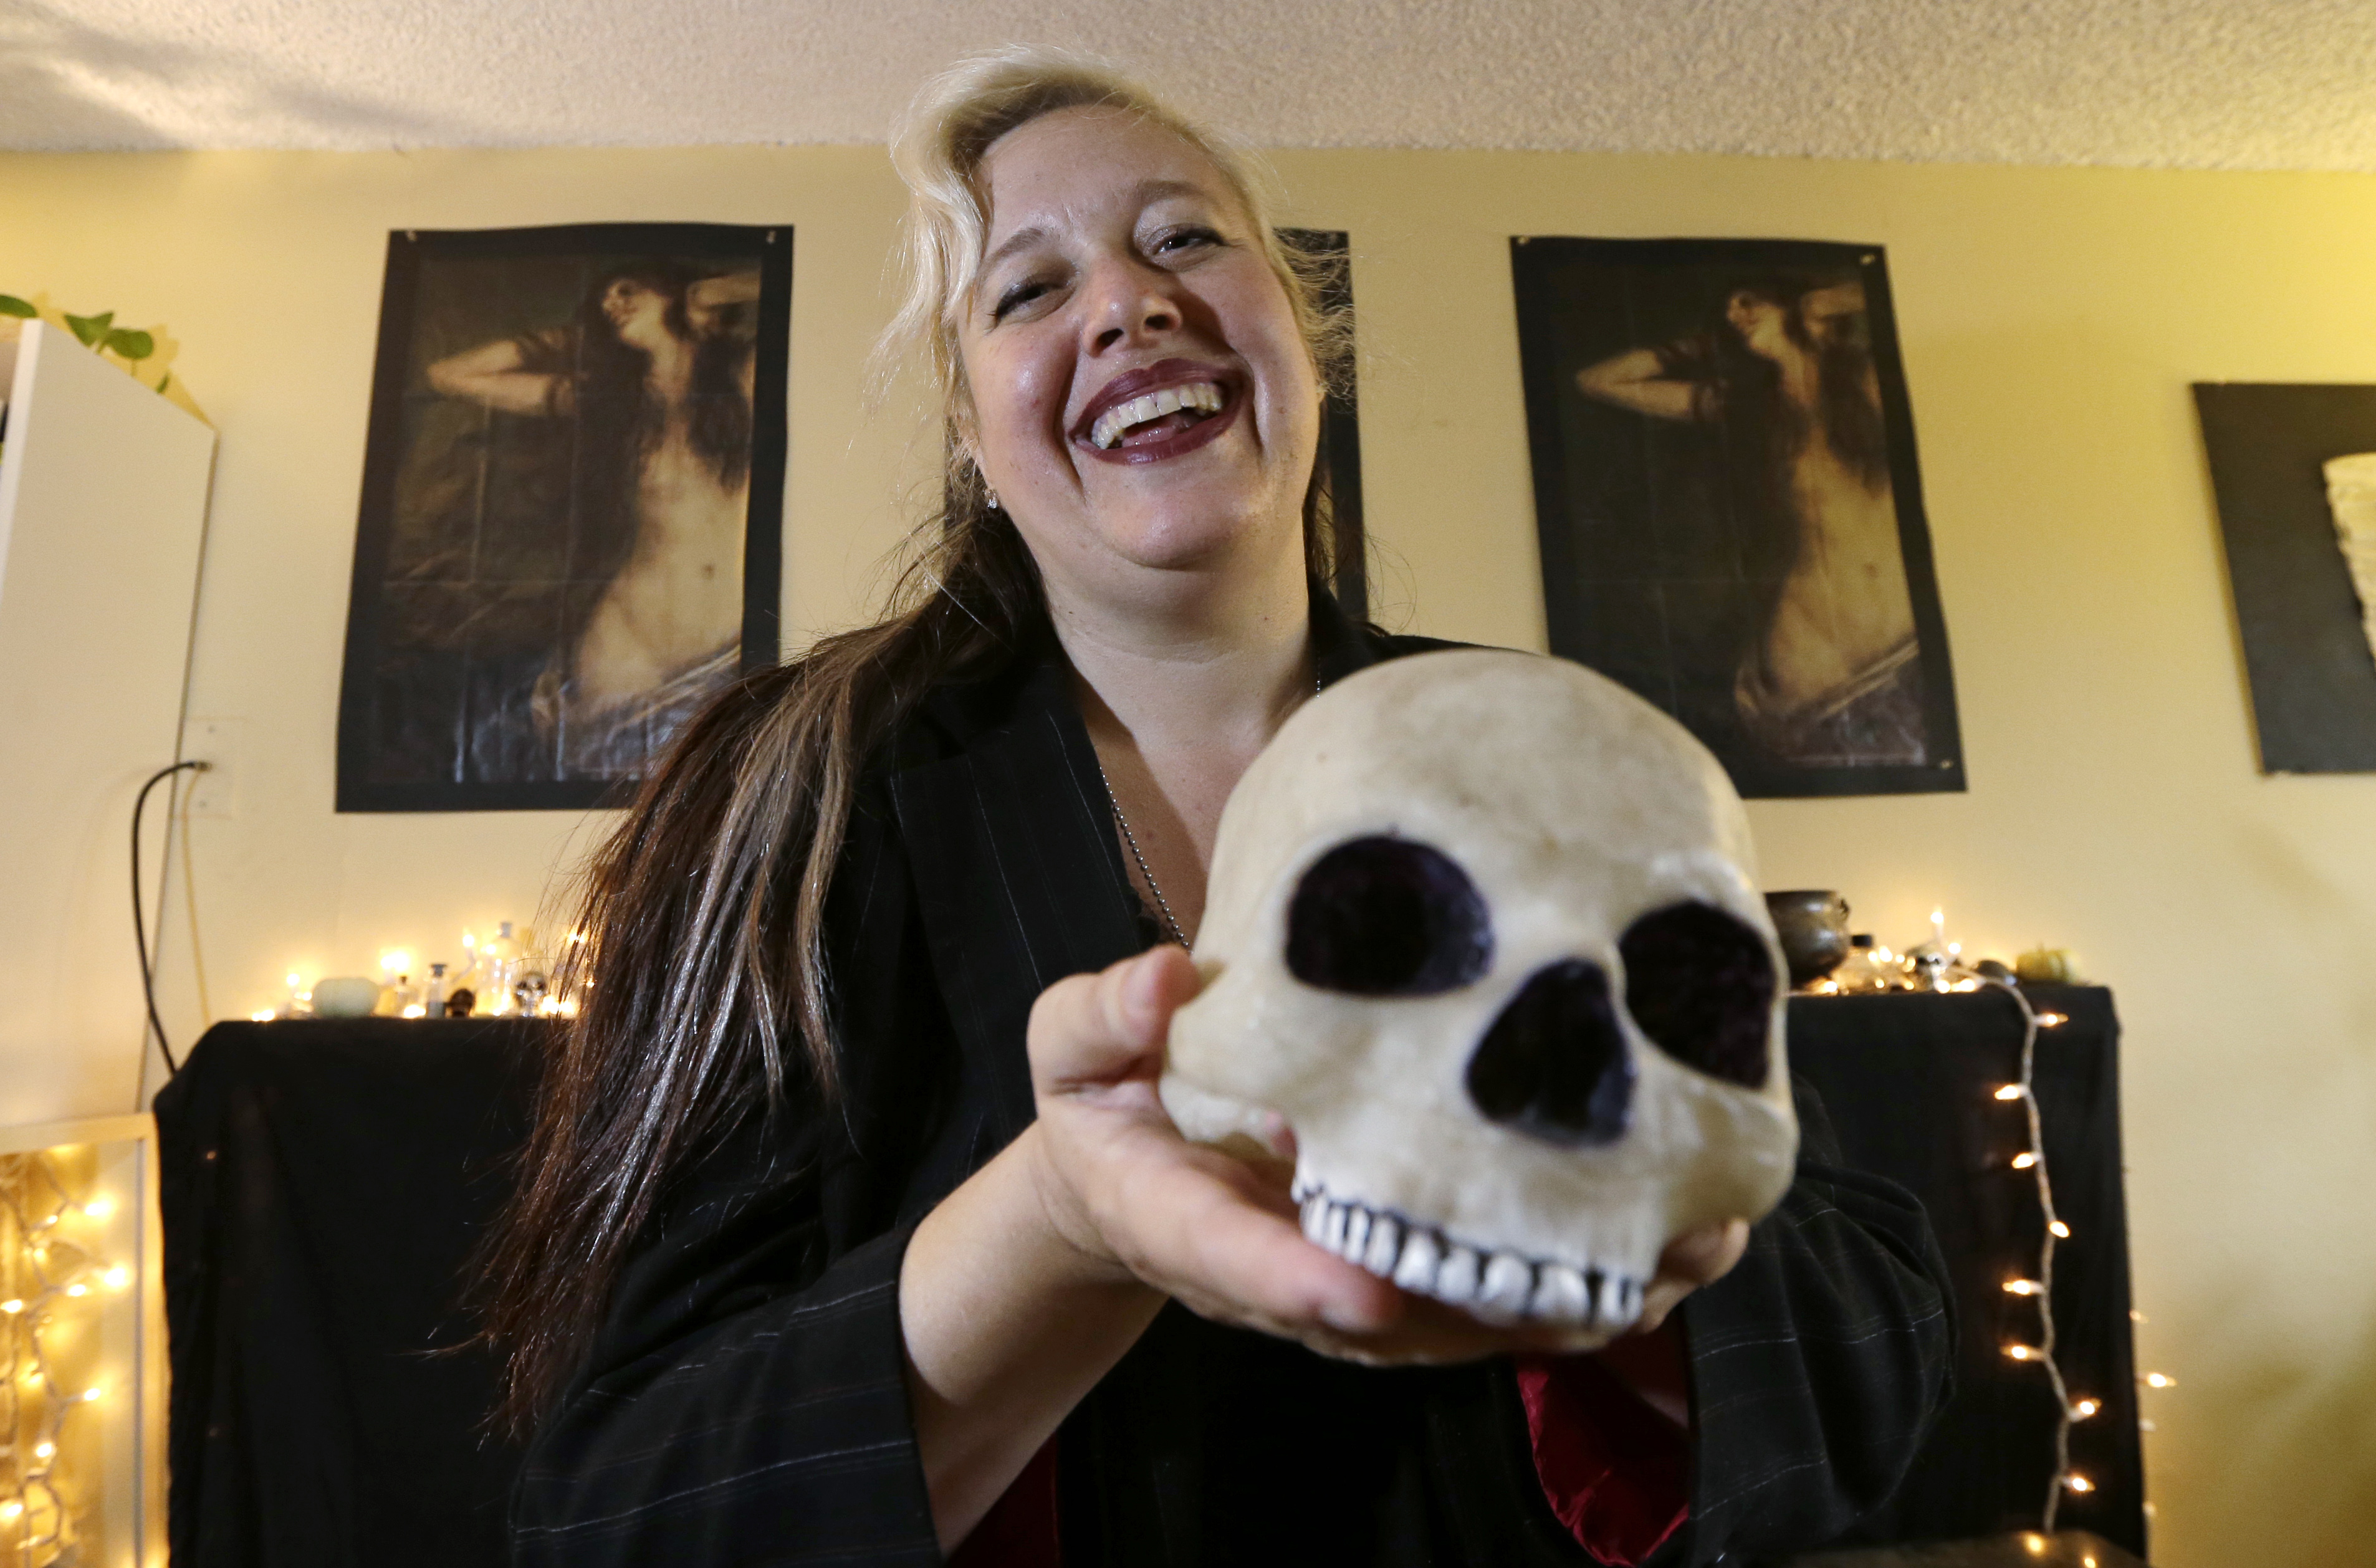 Lilith Starr, chapter head of The Satanic Temple of Seattle, holds a plastic skull while being photographed in her home Wednesday, Oct. 28, 2015, in Seattle. At the invitation of the Bremerton High School senior class president, Starr says that her group of self-described Satanists will attend the school's football game Thursday to protest a decision by a Christian coach to continue praying at the 50-yard line after games. (AP Photo/Elaine Thompson)